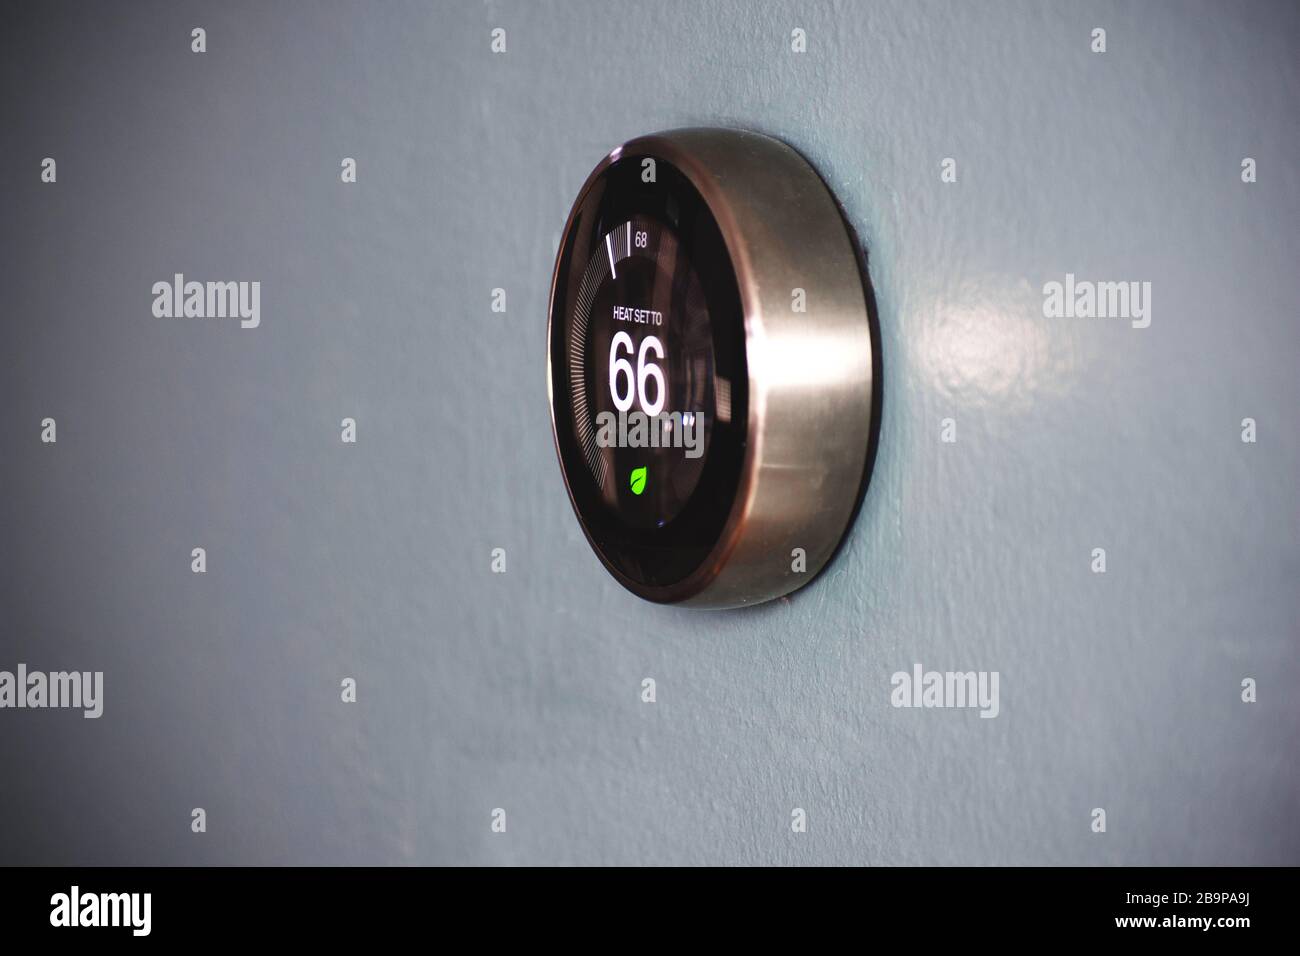 Thermostat isolated on light blue wall. Smart home tech to save money and energy. Stock Photo